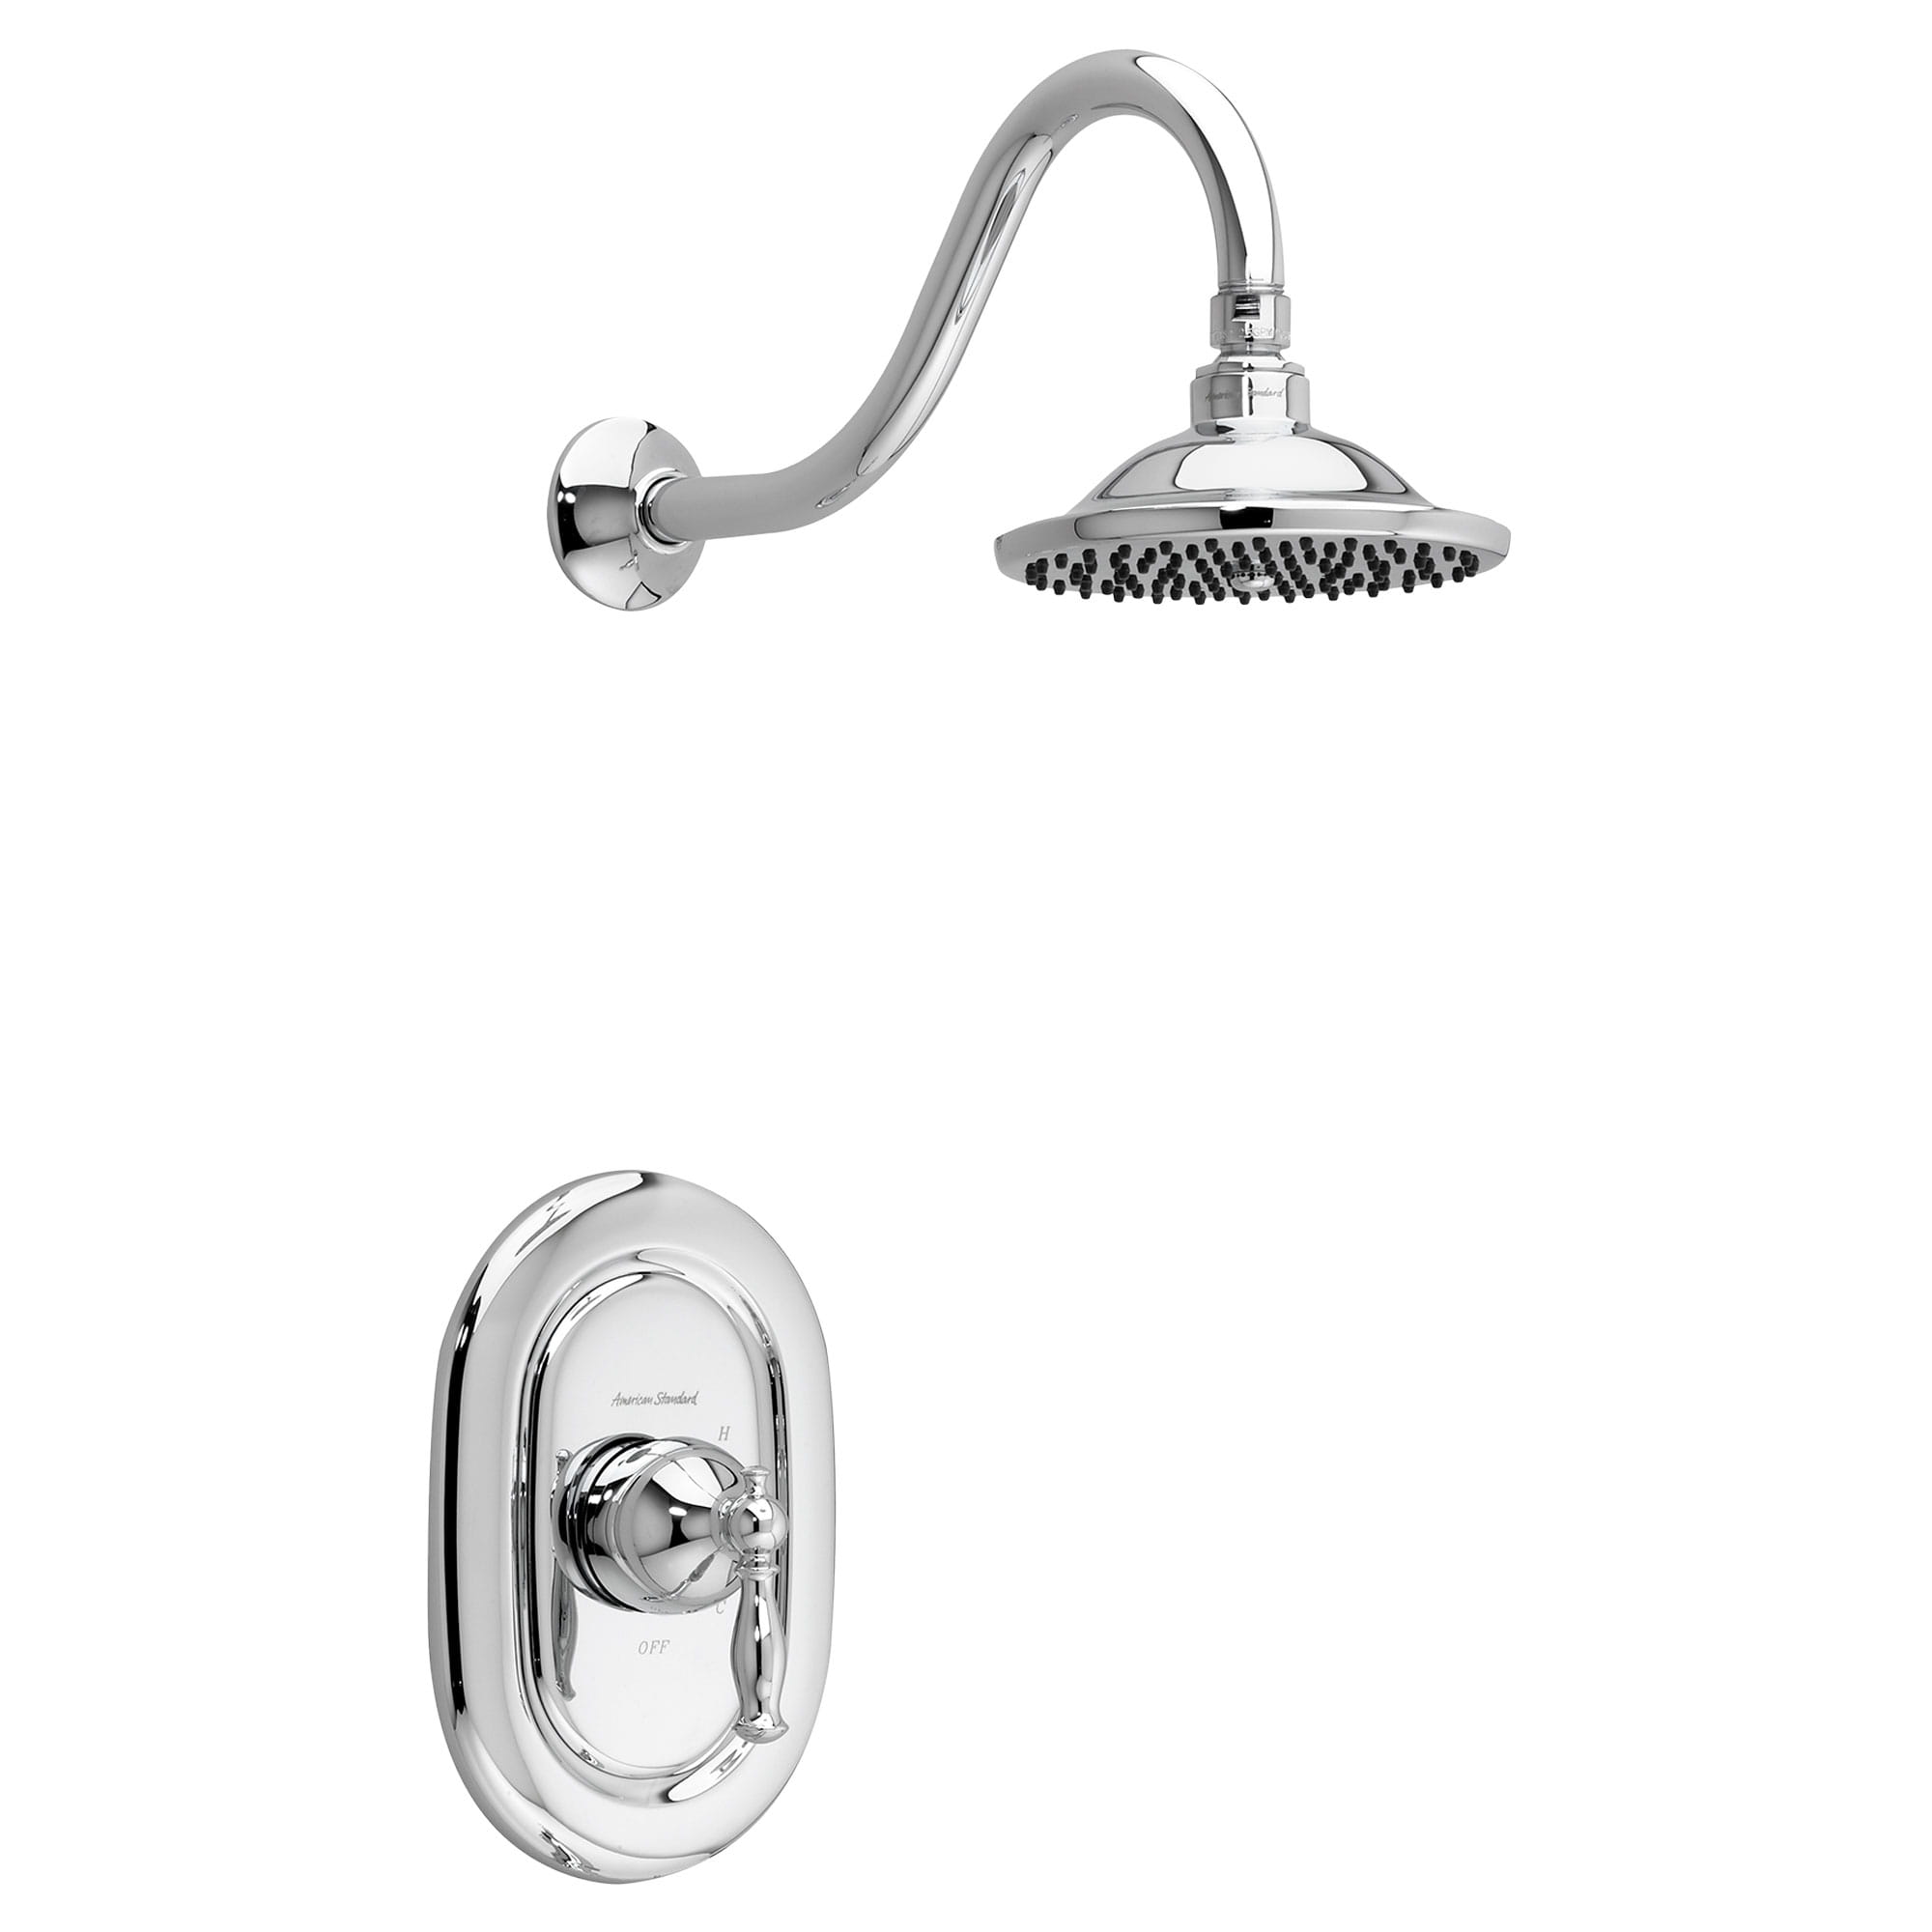 Quentin 2.5 GPM Shower Trim Kit with Rain Showerhead and Lever Handle